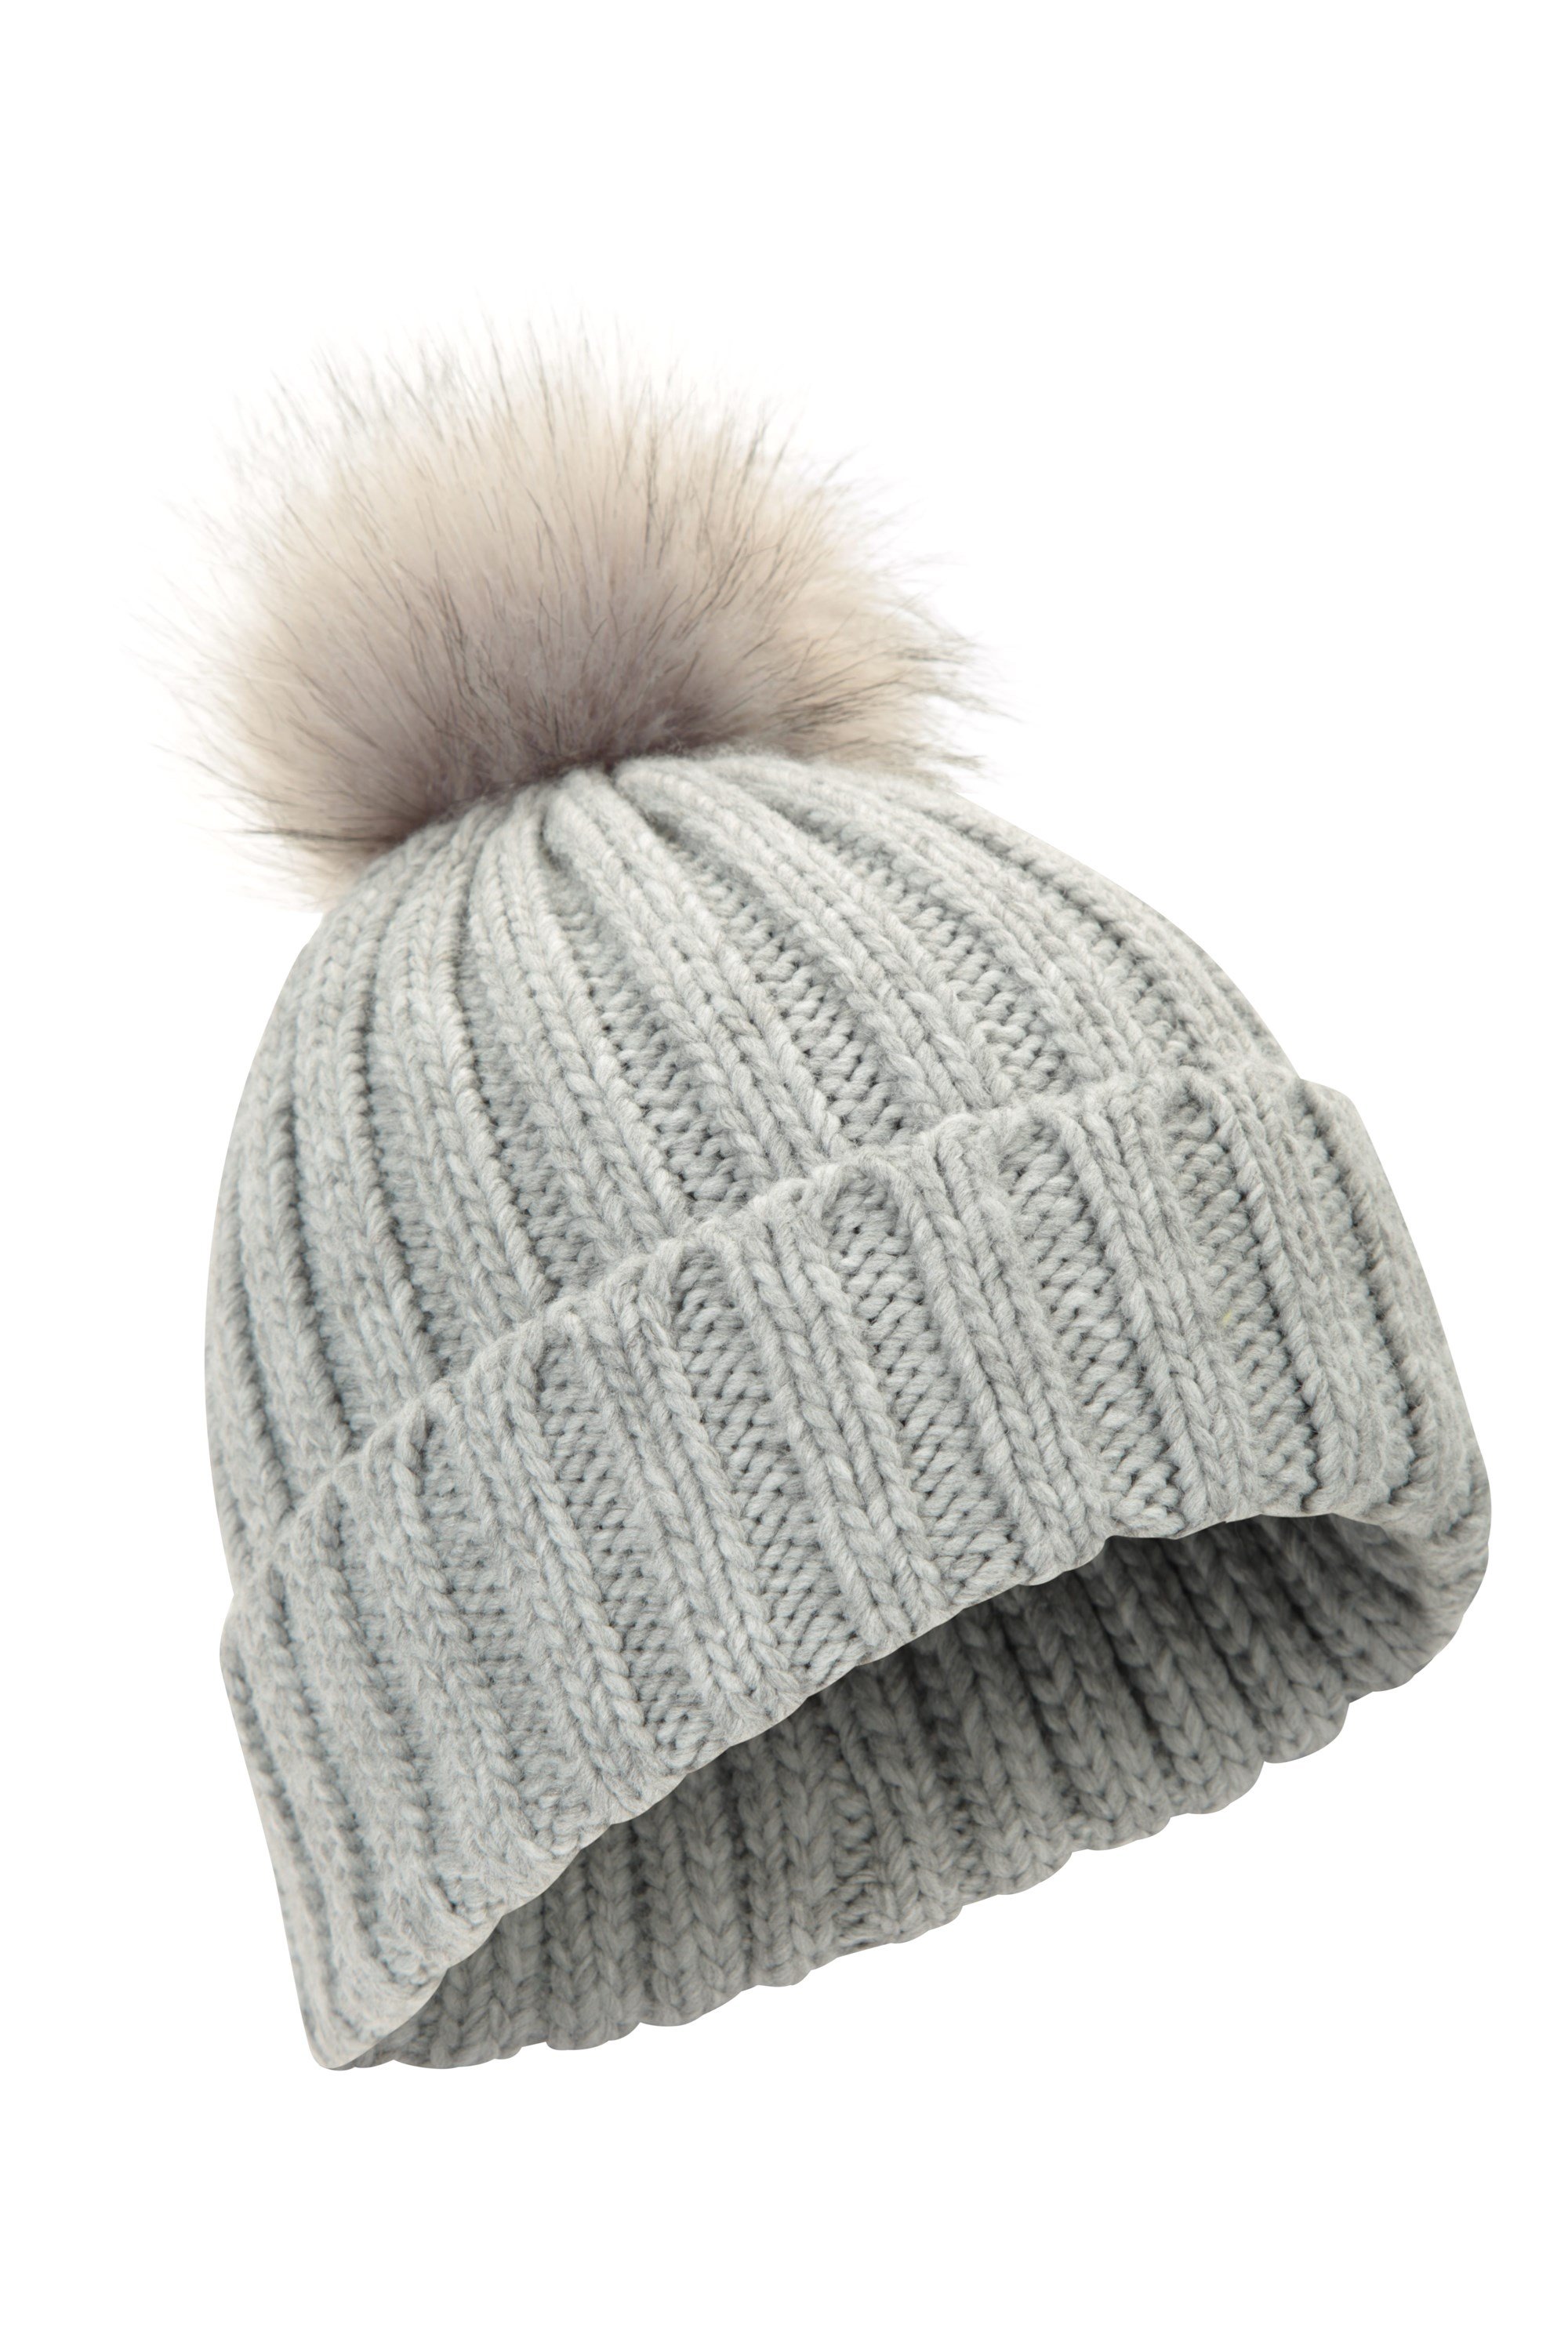 Mountain Warehouse Mountain Warehouse Bobble hat with tassels  Womens one size  box 19 item 64 mams 